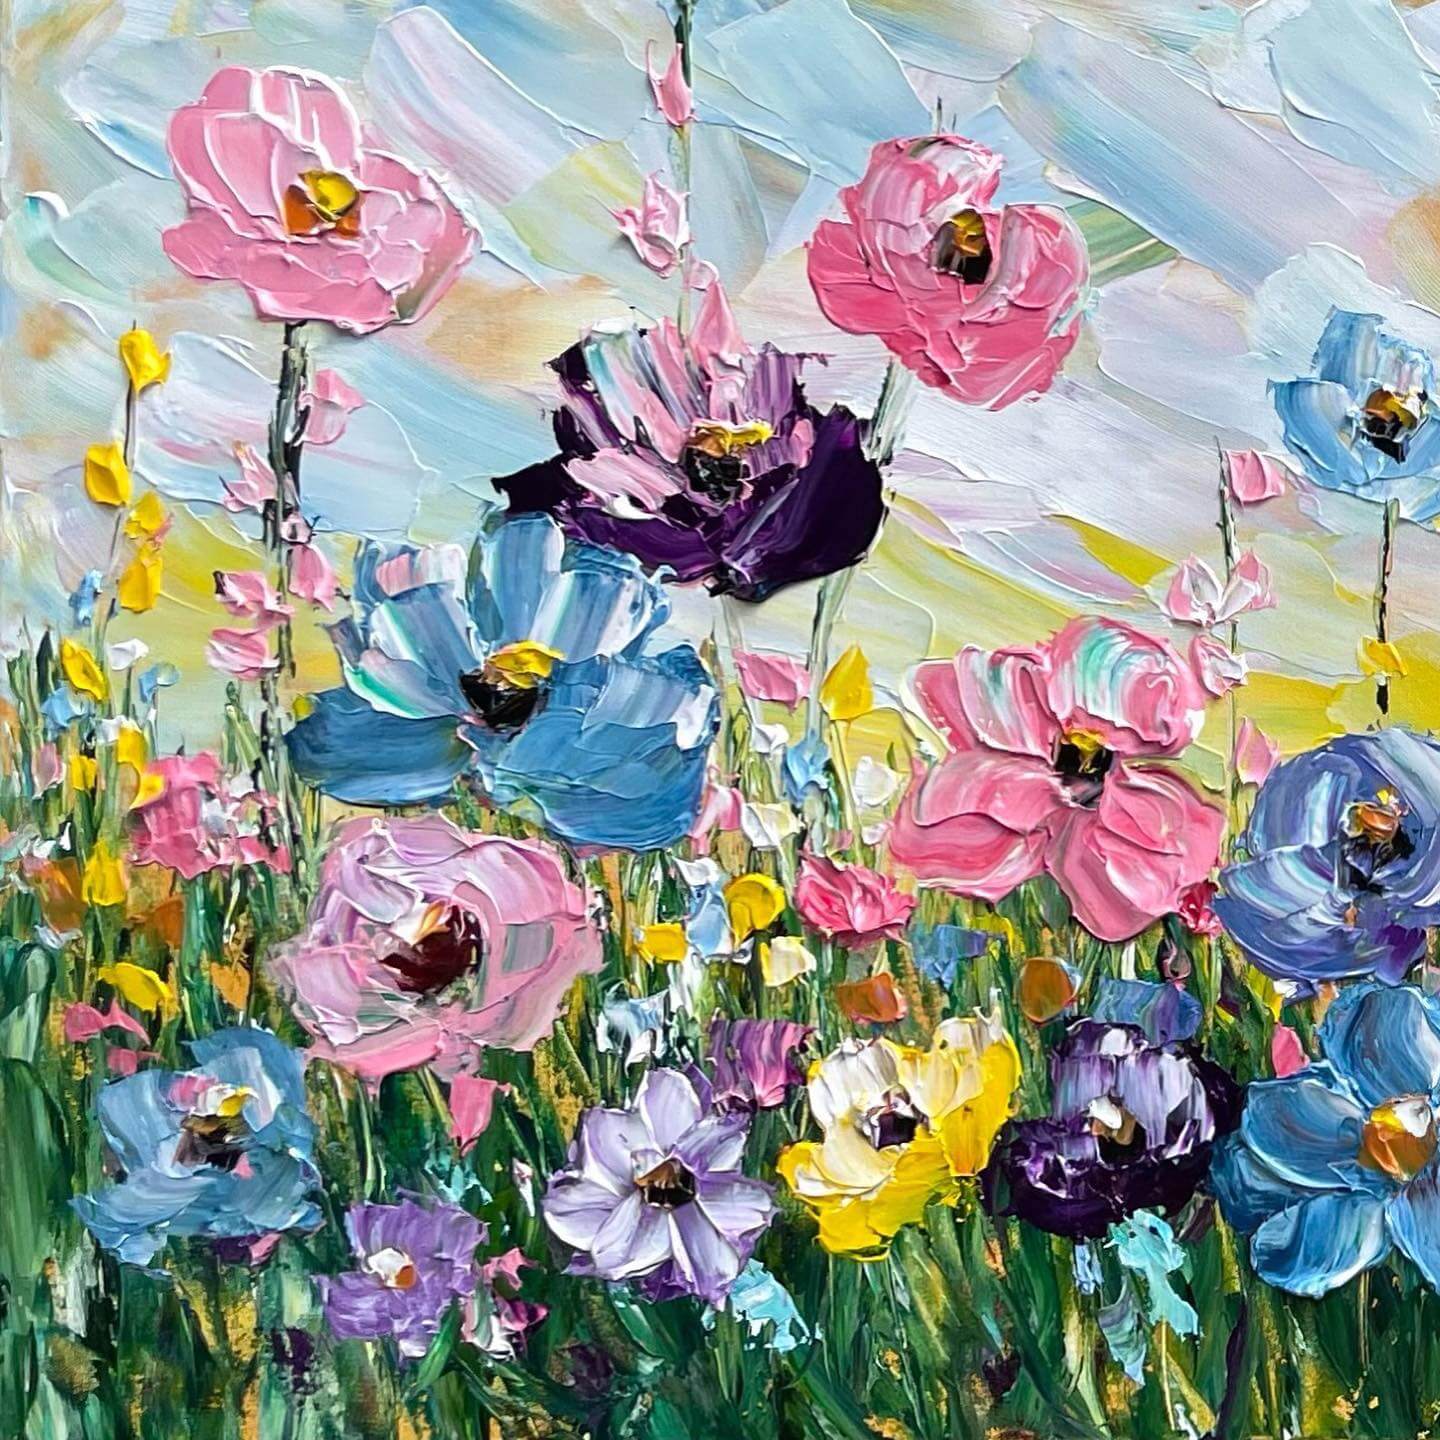 Painting of wild flowers on a green field by Giselle Denis.